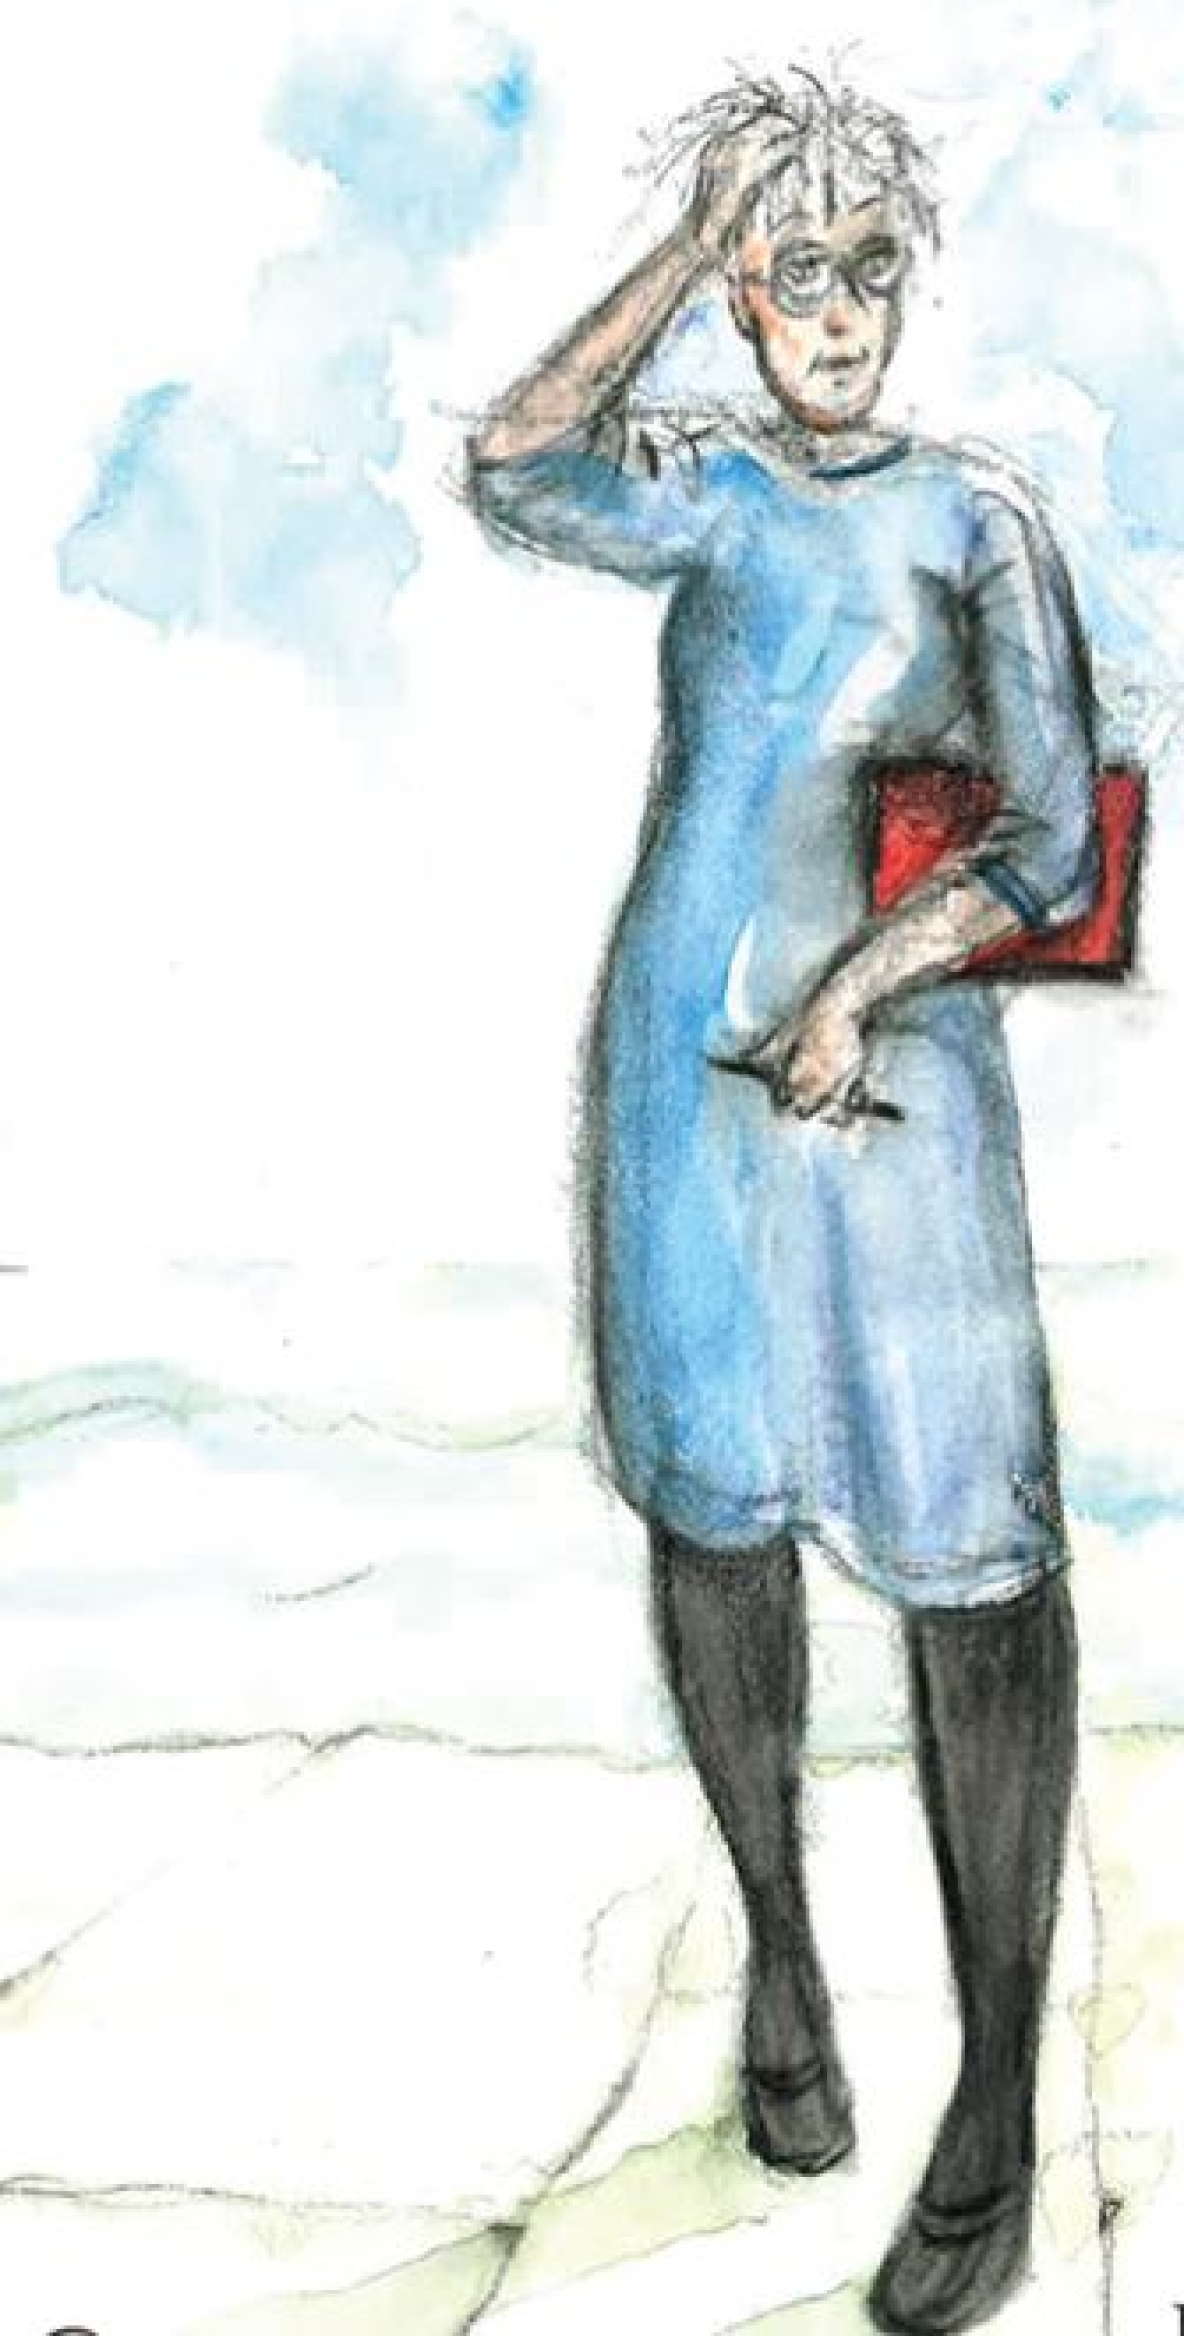 Illustration at the front of the book of a woman wearing a blue dress with a red bag